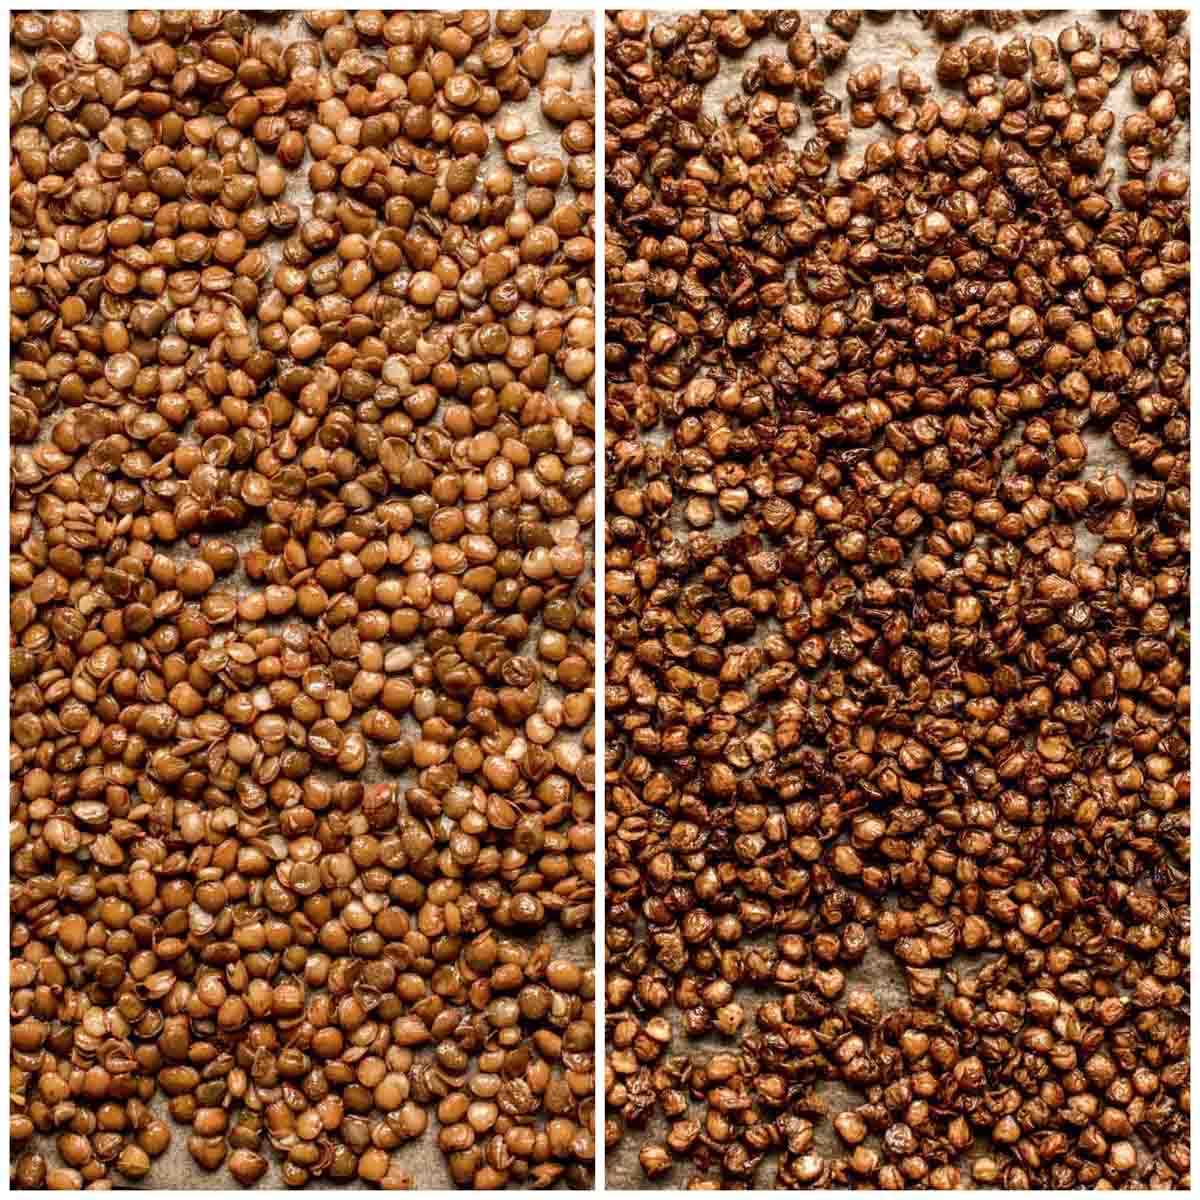 Side-by-side comparison of cooked and roasted lentils.